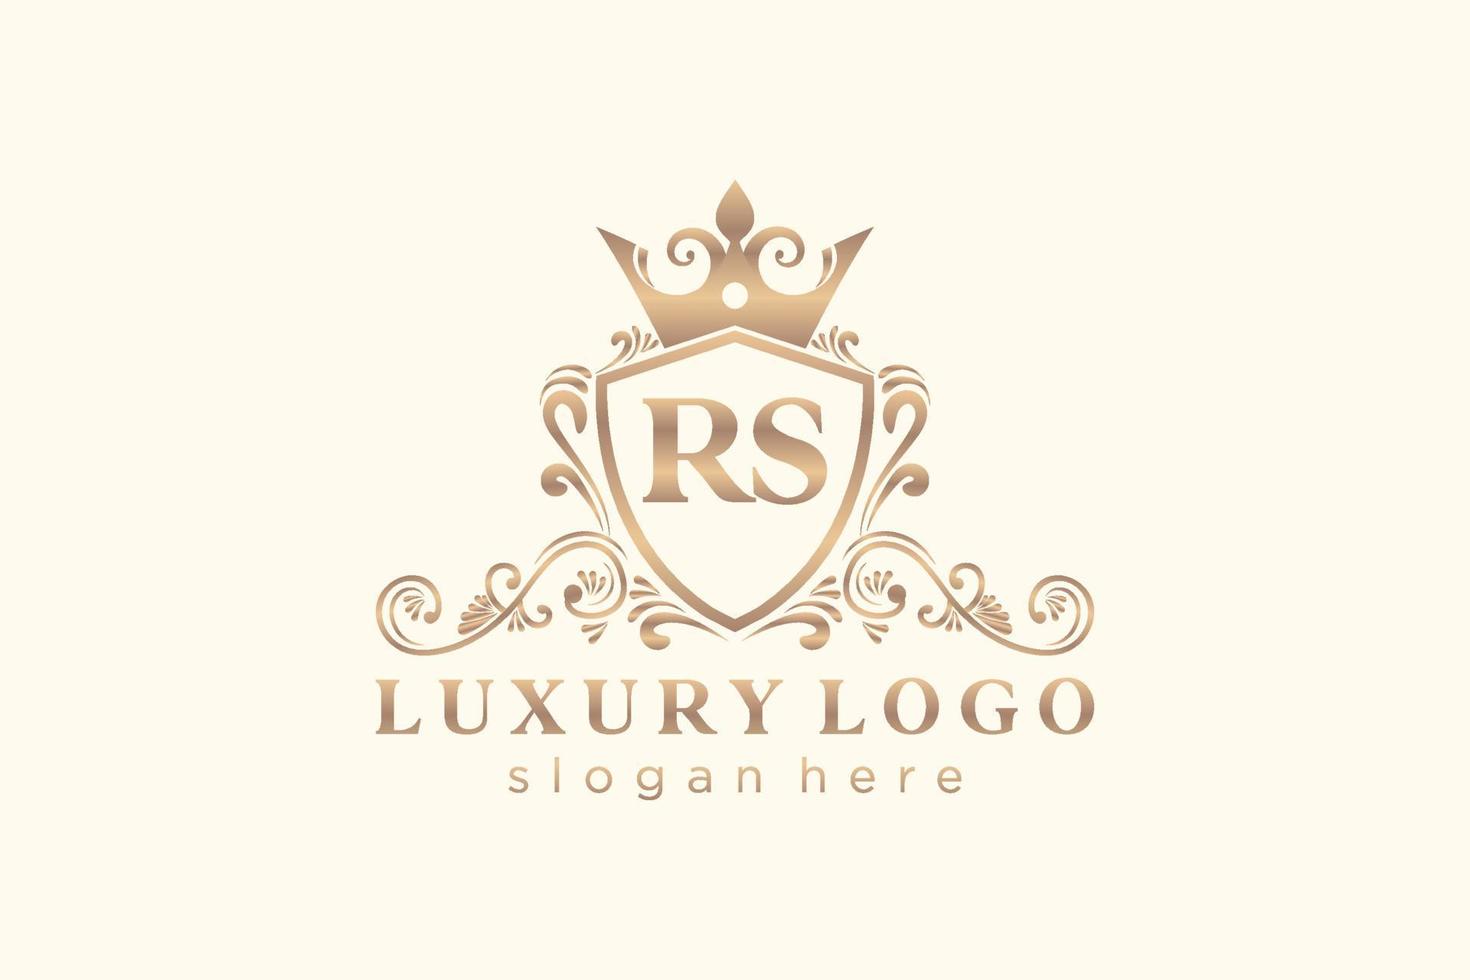 Initial RS Letter Royal Luxury Logo template in vector art for Restaurant, Royalty, Boutique, Cafe, Hotel, Heraldic, Jewelry, Fashion and other vector illustration.